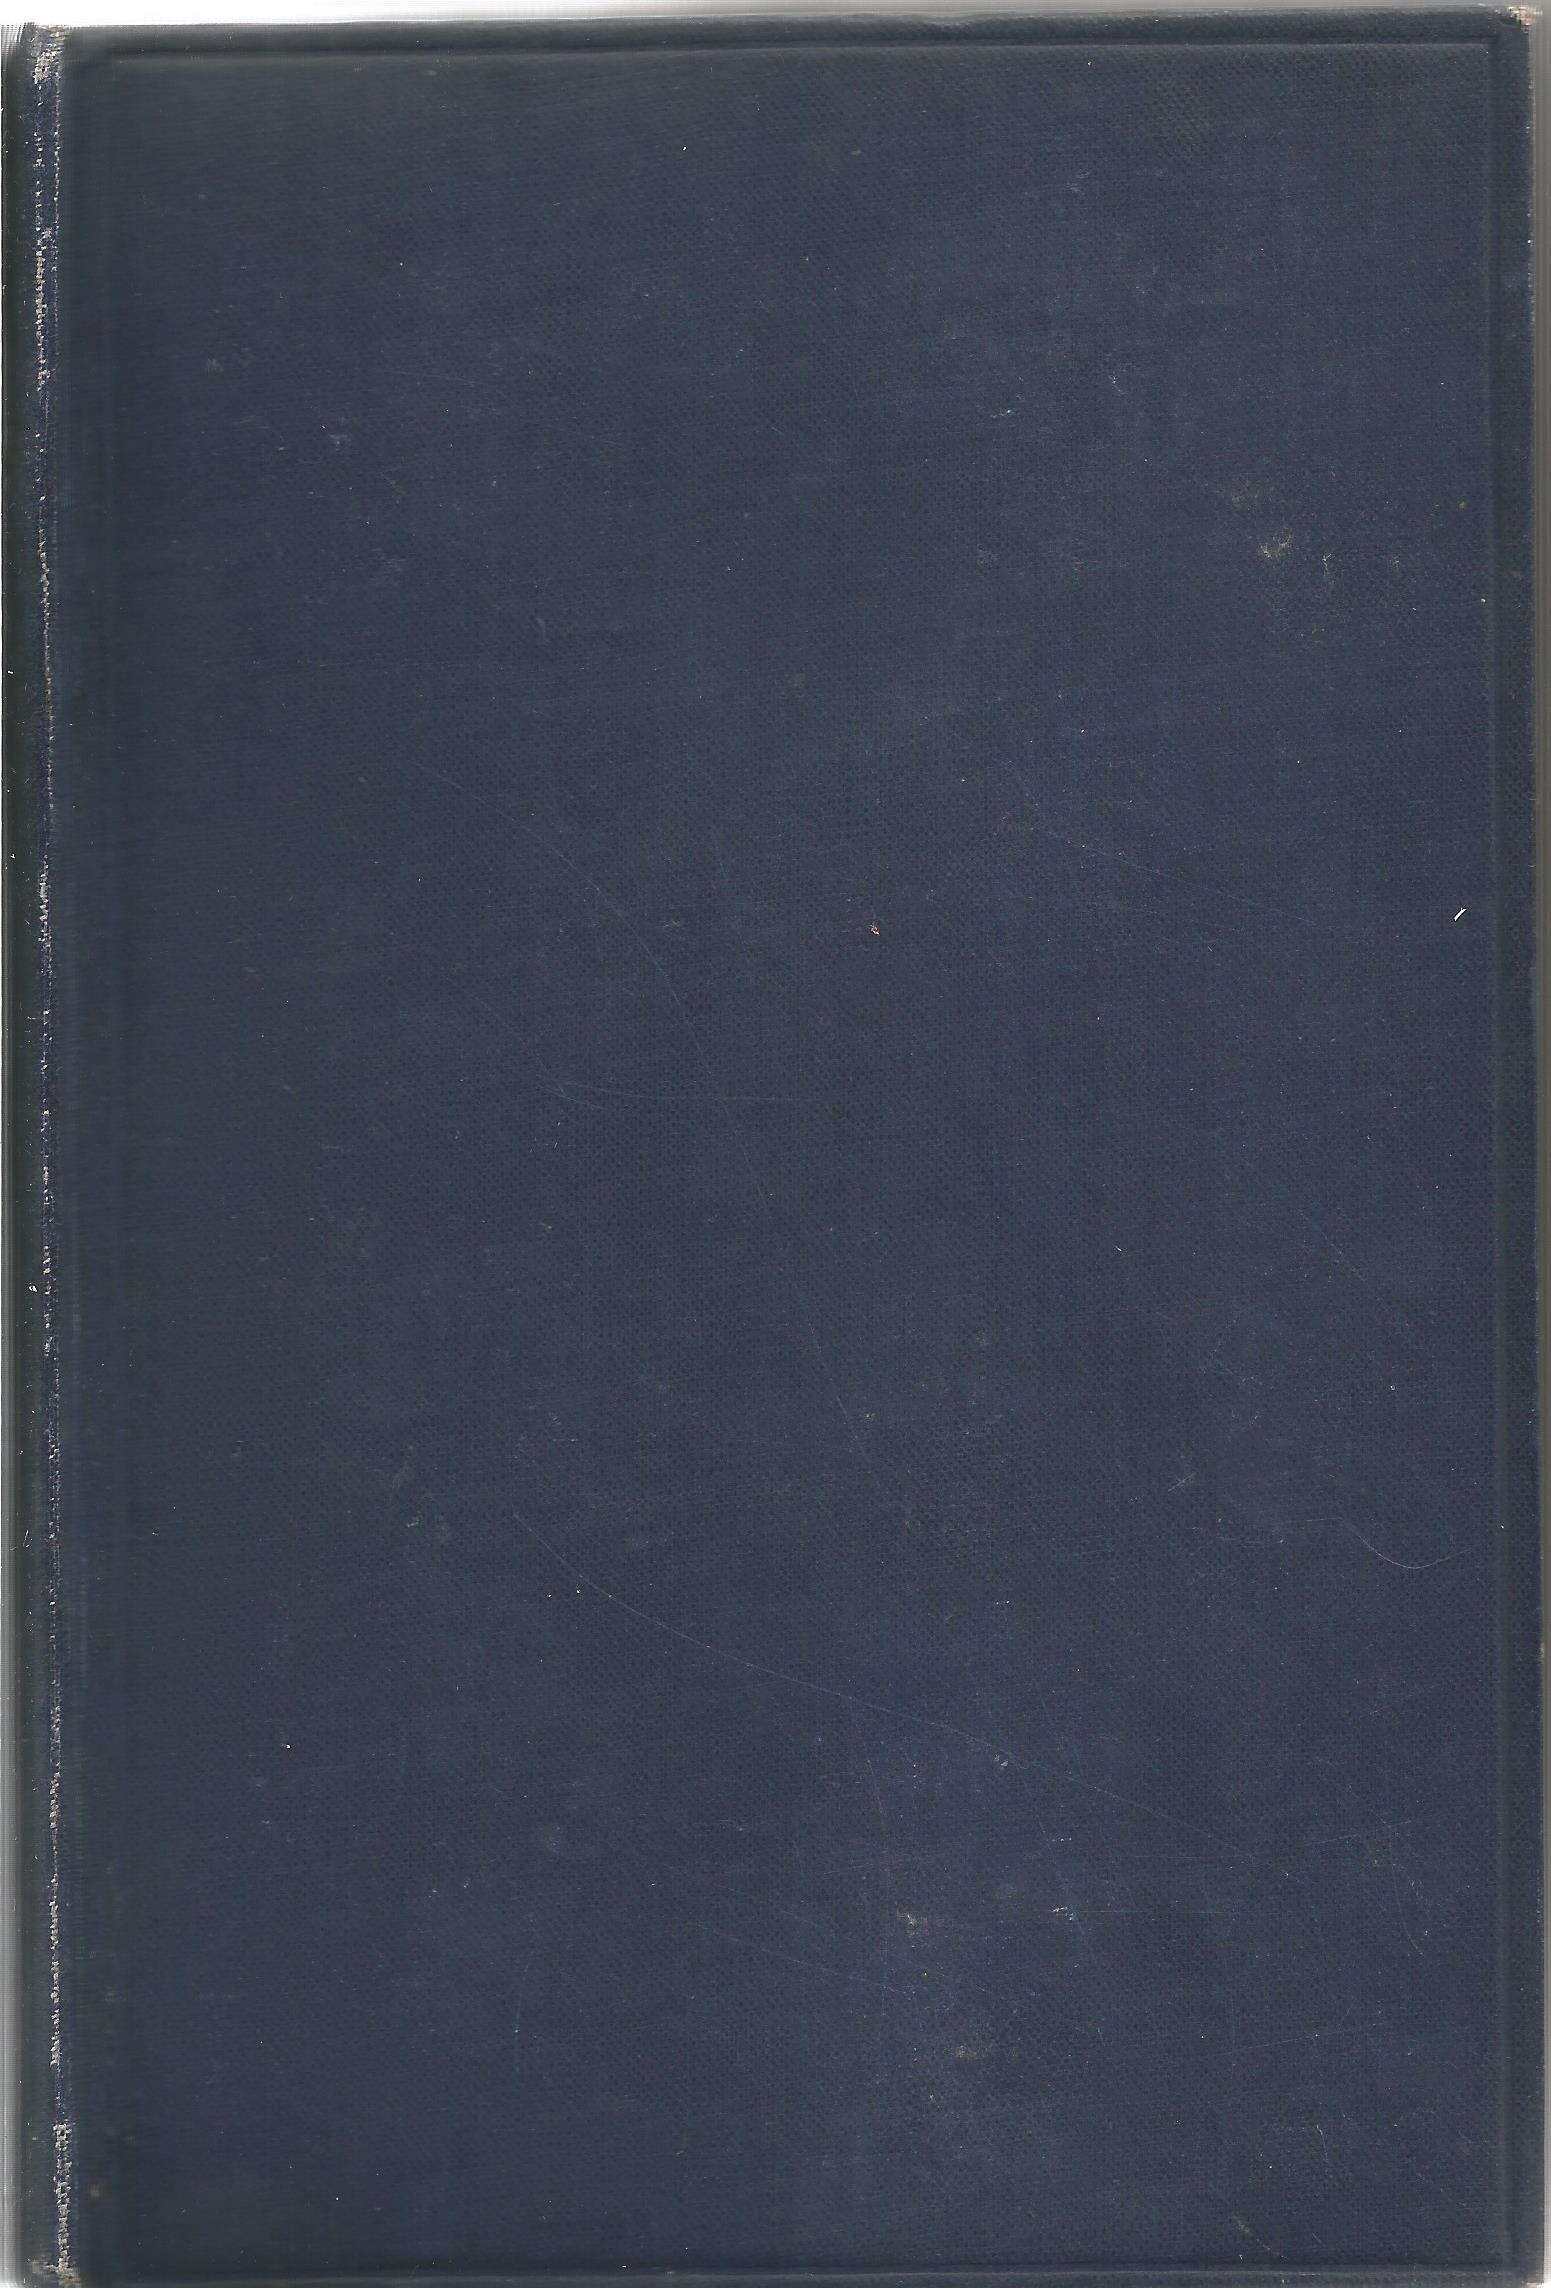 Air Facts and Problems. Lord Thomson. A First Edition signed hardback book. Signed presentation